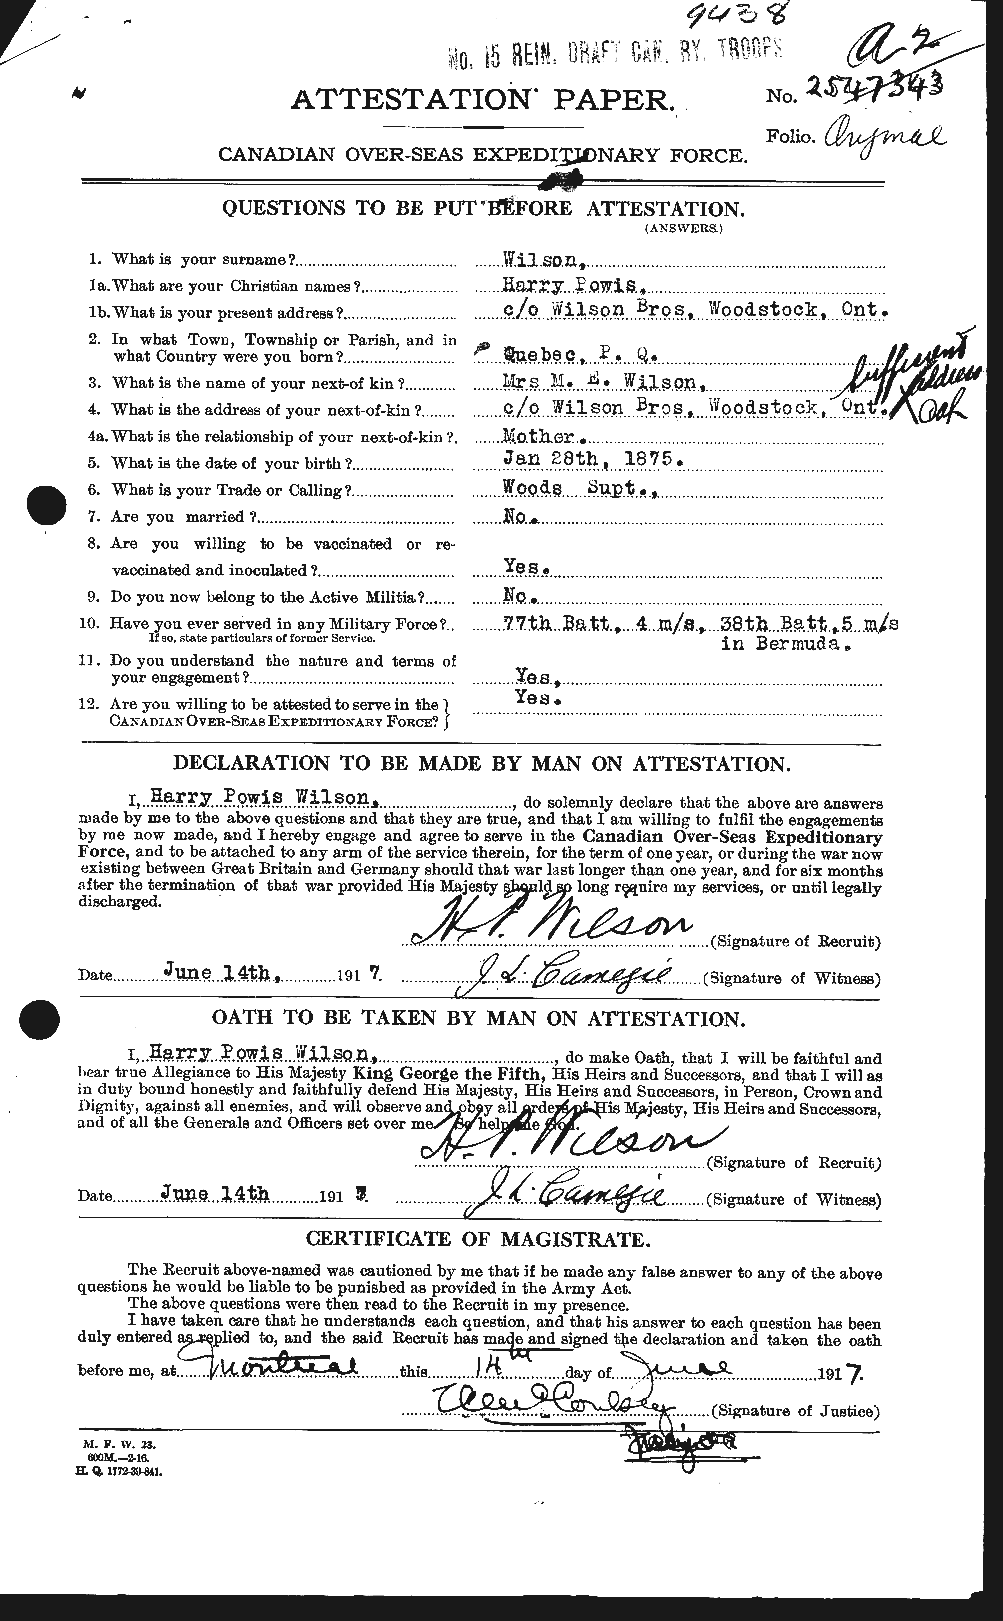 Personnel Records of the First World War - CEF 679470a